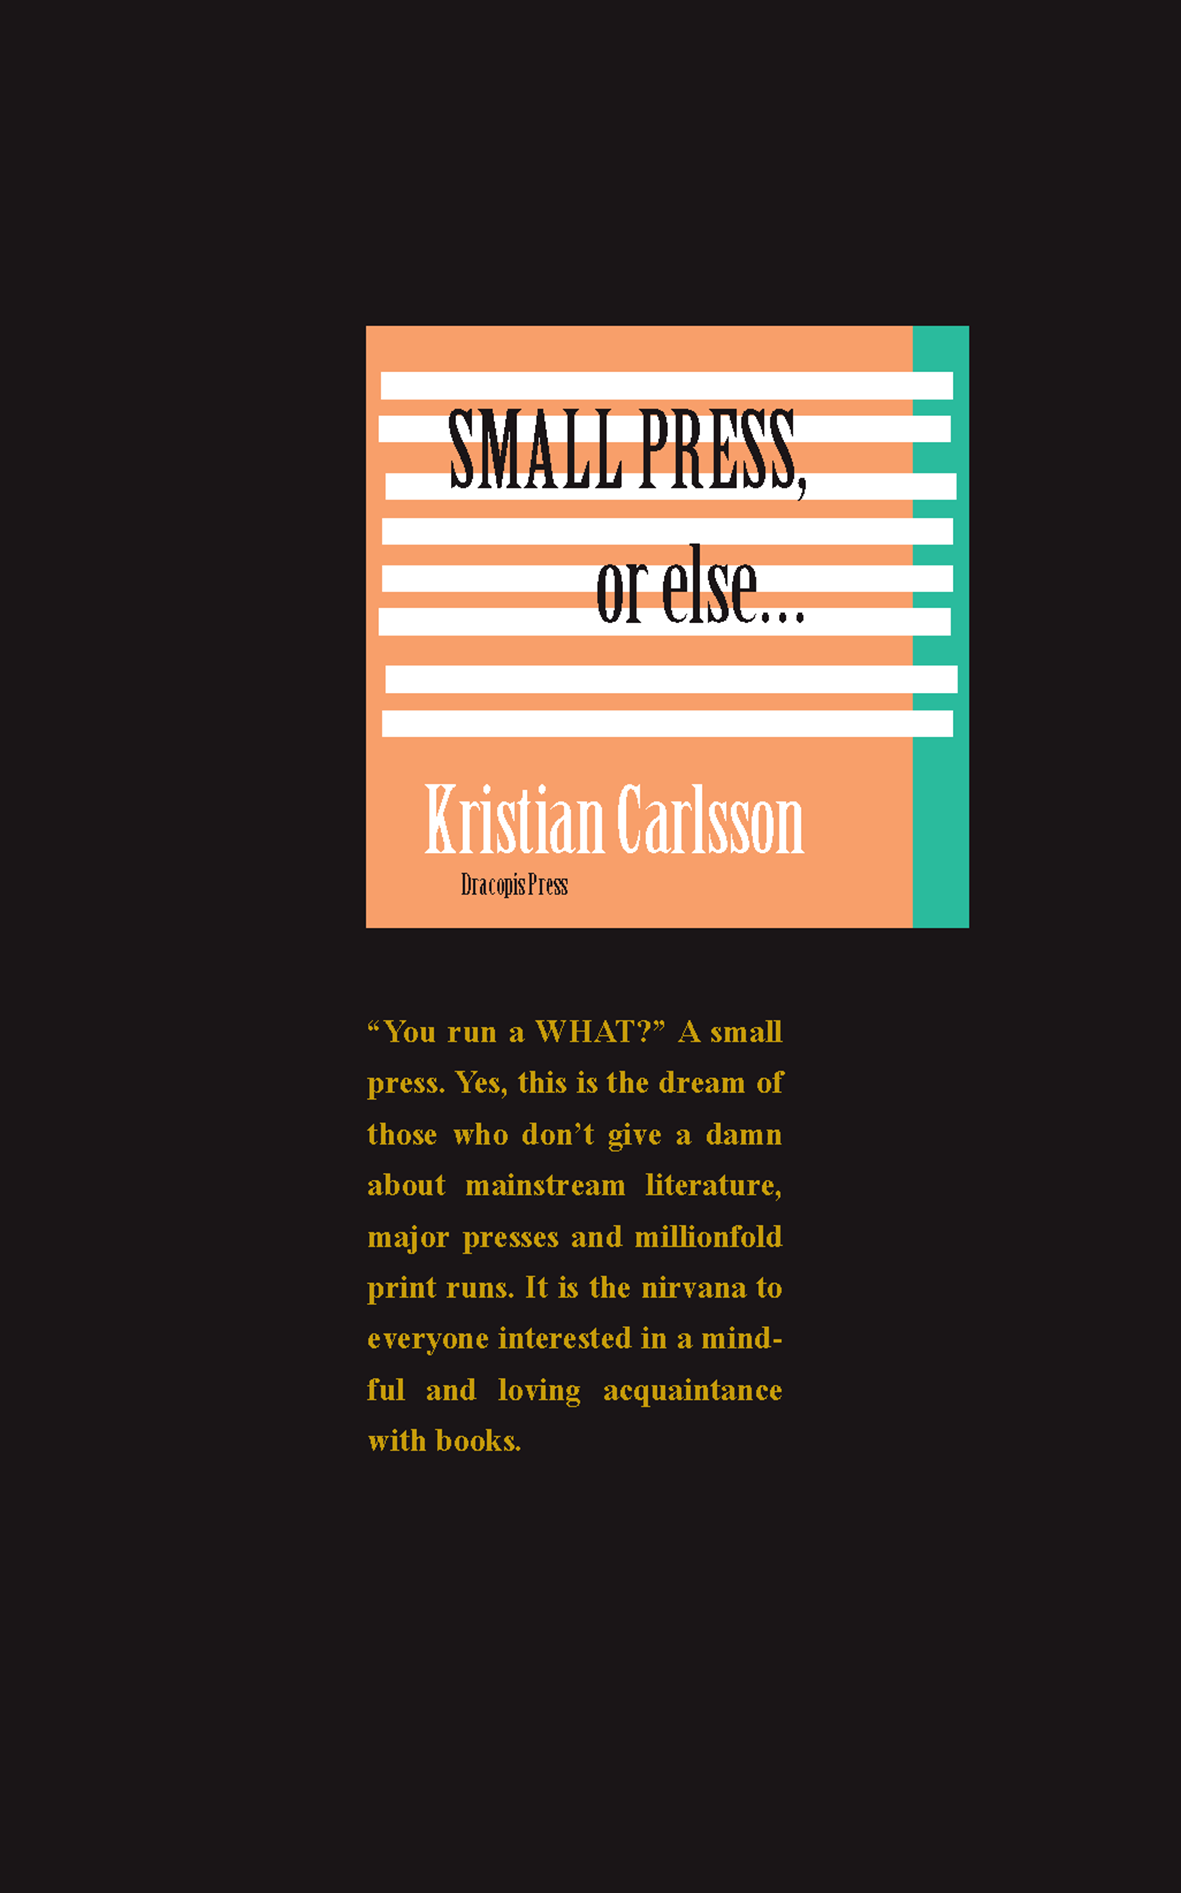 Small press or else cover